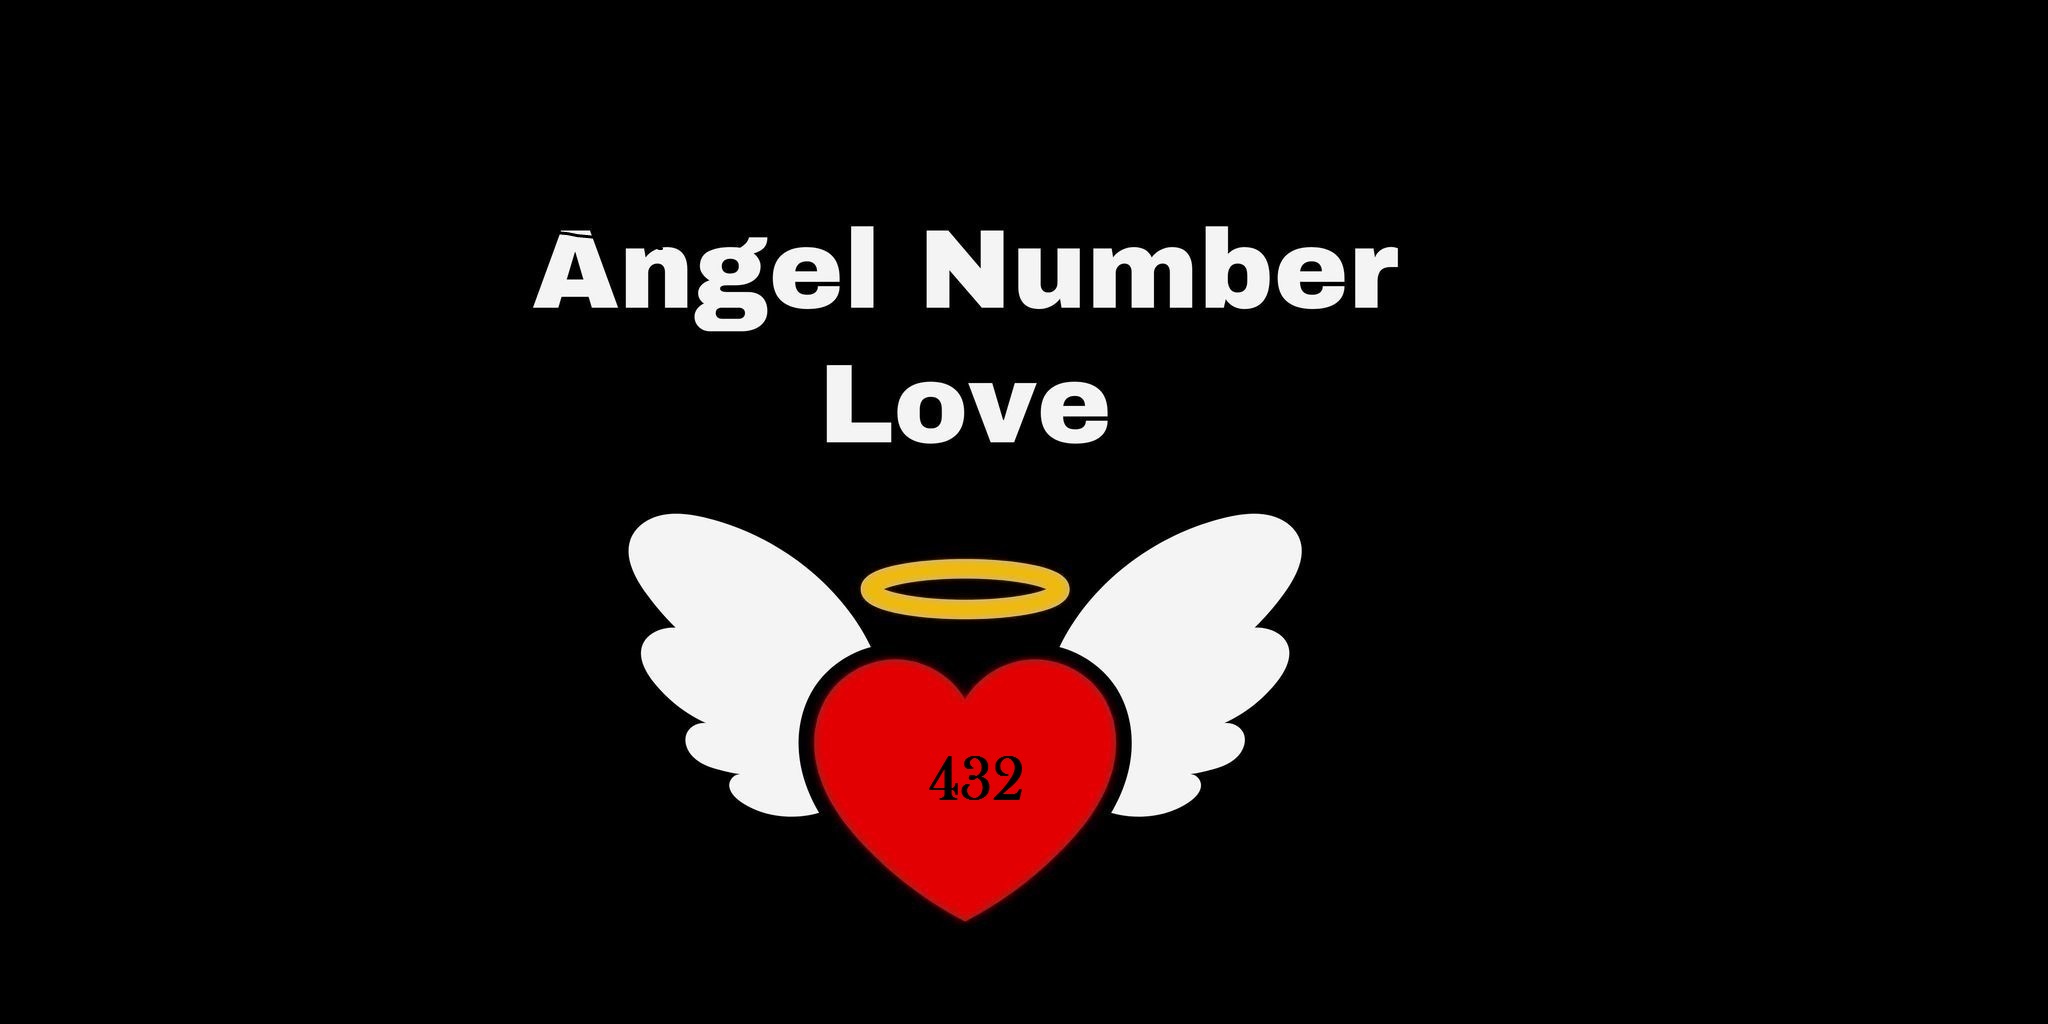 432 Angel Number Meaning In Love & Relationship